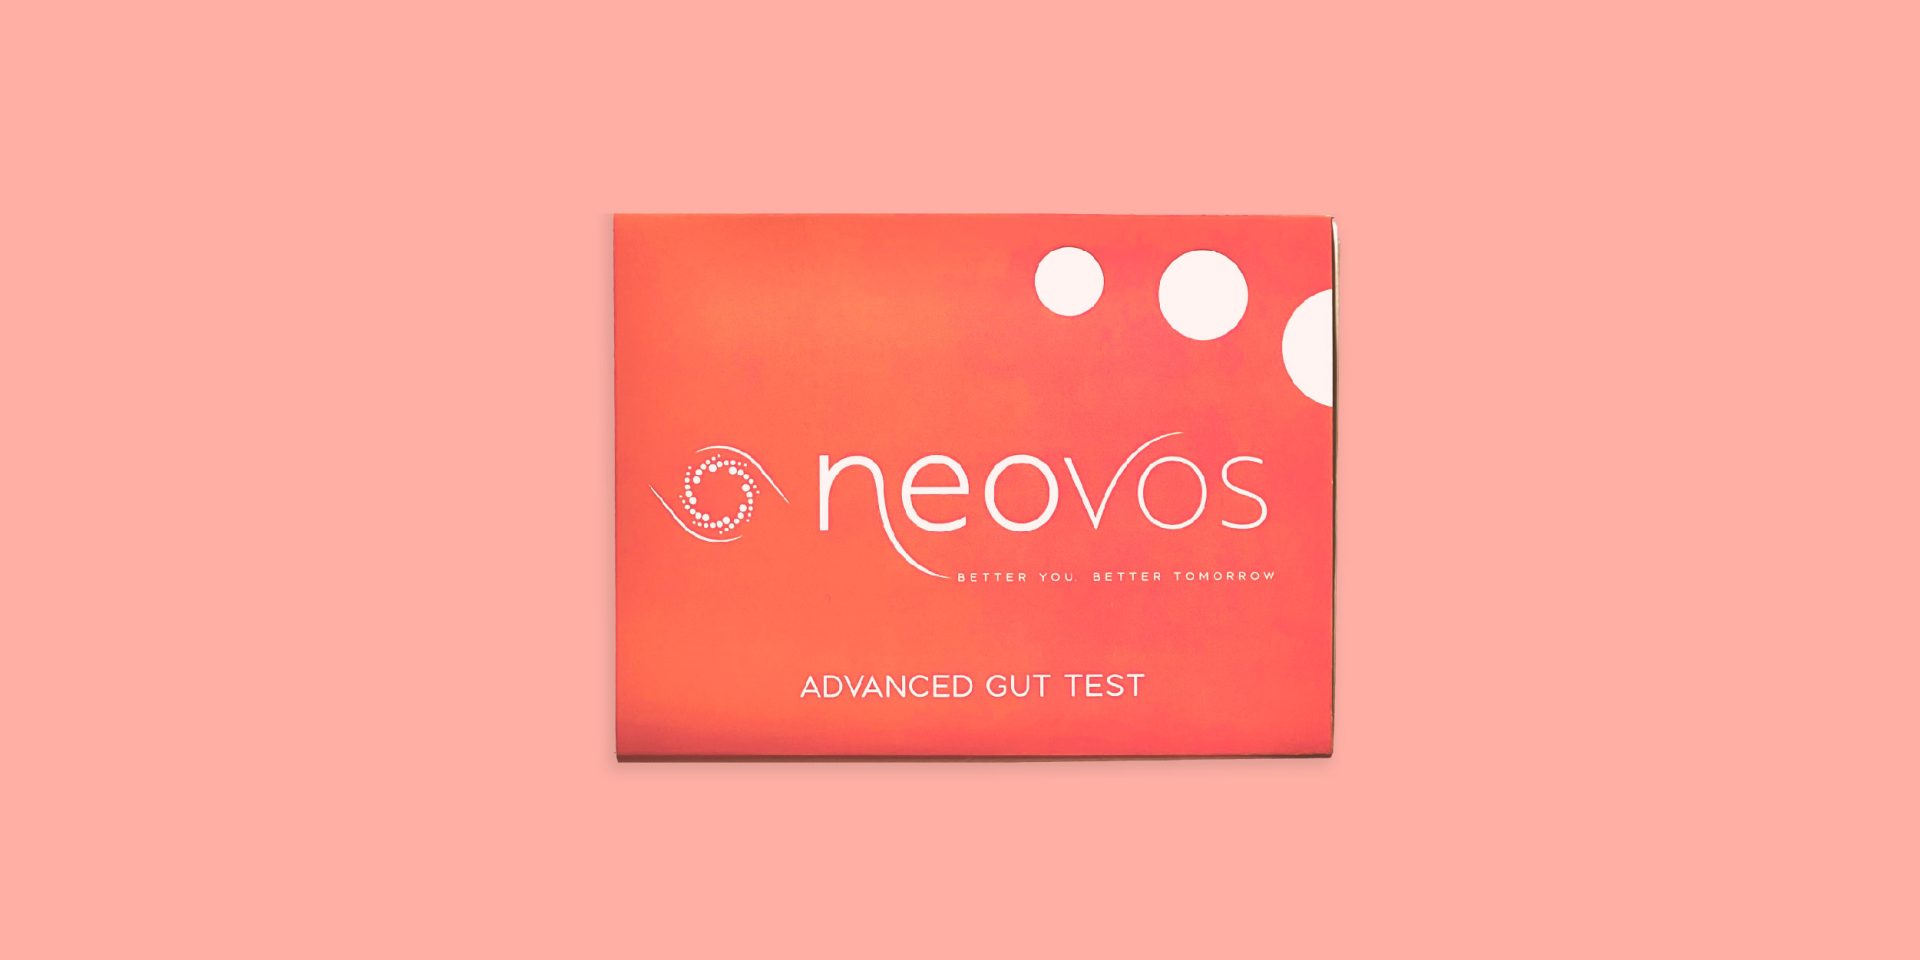 Our Advanced Gut Test is Here